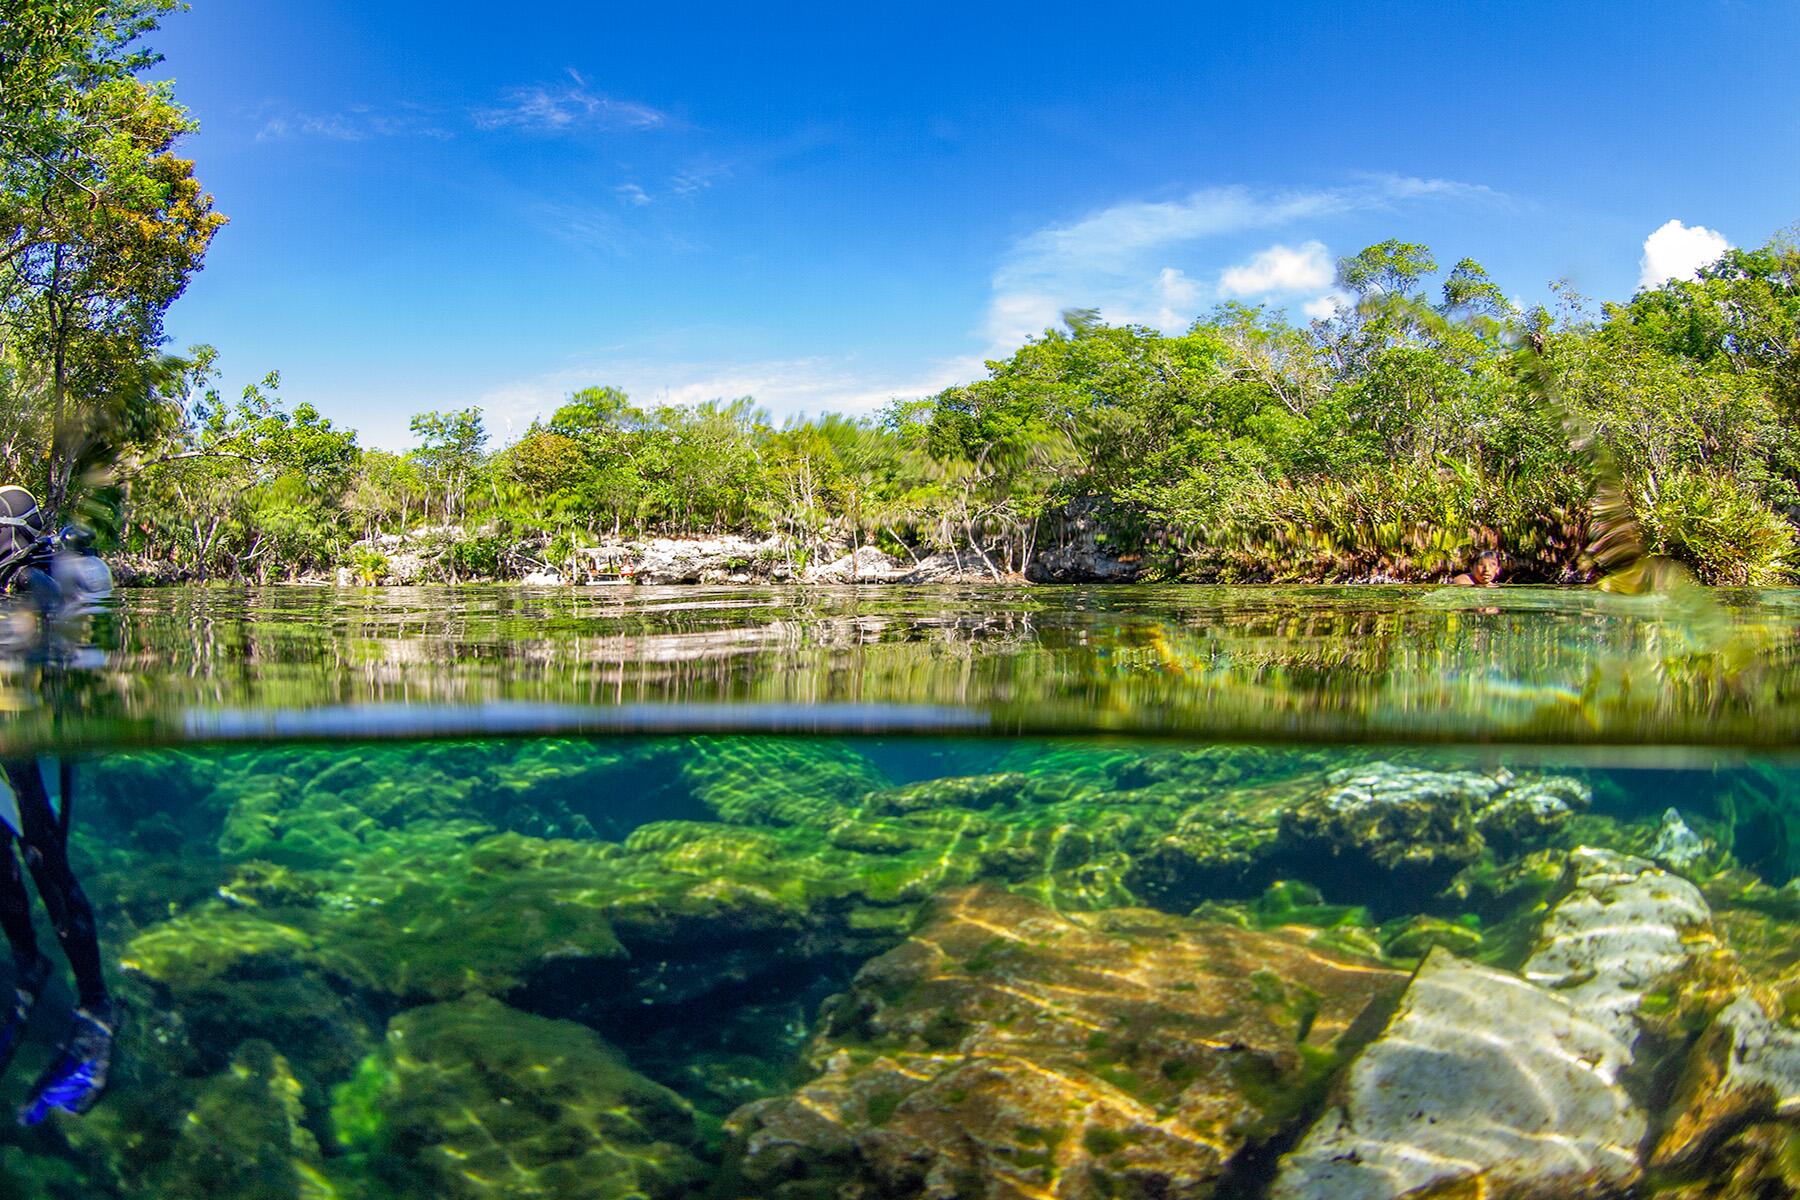 <a href='https://www.fodors.com/world/mexico-and-central-america/mexico/the-riviera-maya/experiences/news/photos/best-cenotes-to-visit-in-riviera-maya#'>From &quot;The 10 Most Magical Cenotes in the Riviera Maya: Cenote Jardín del Eden&quot;</a>